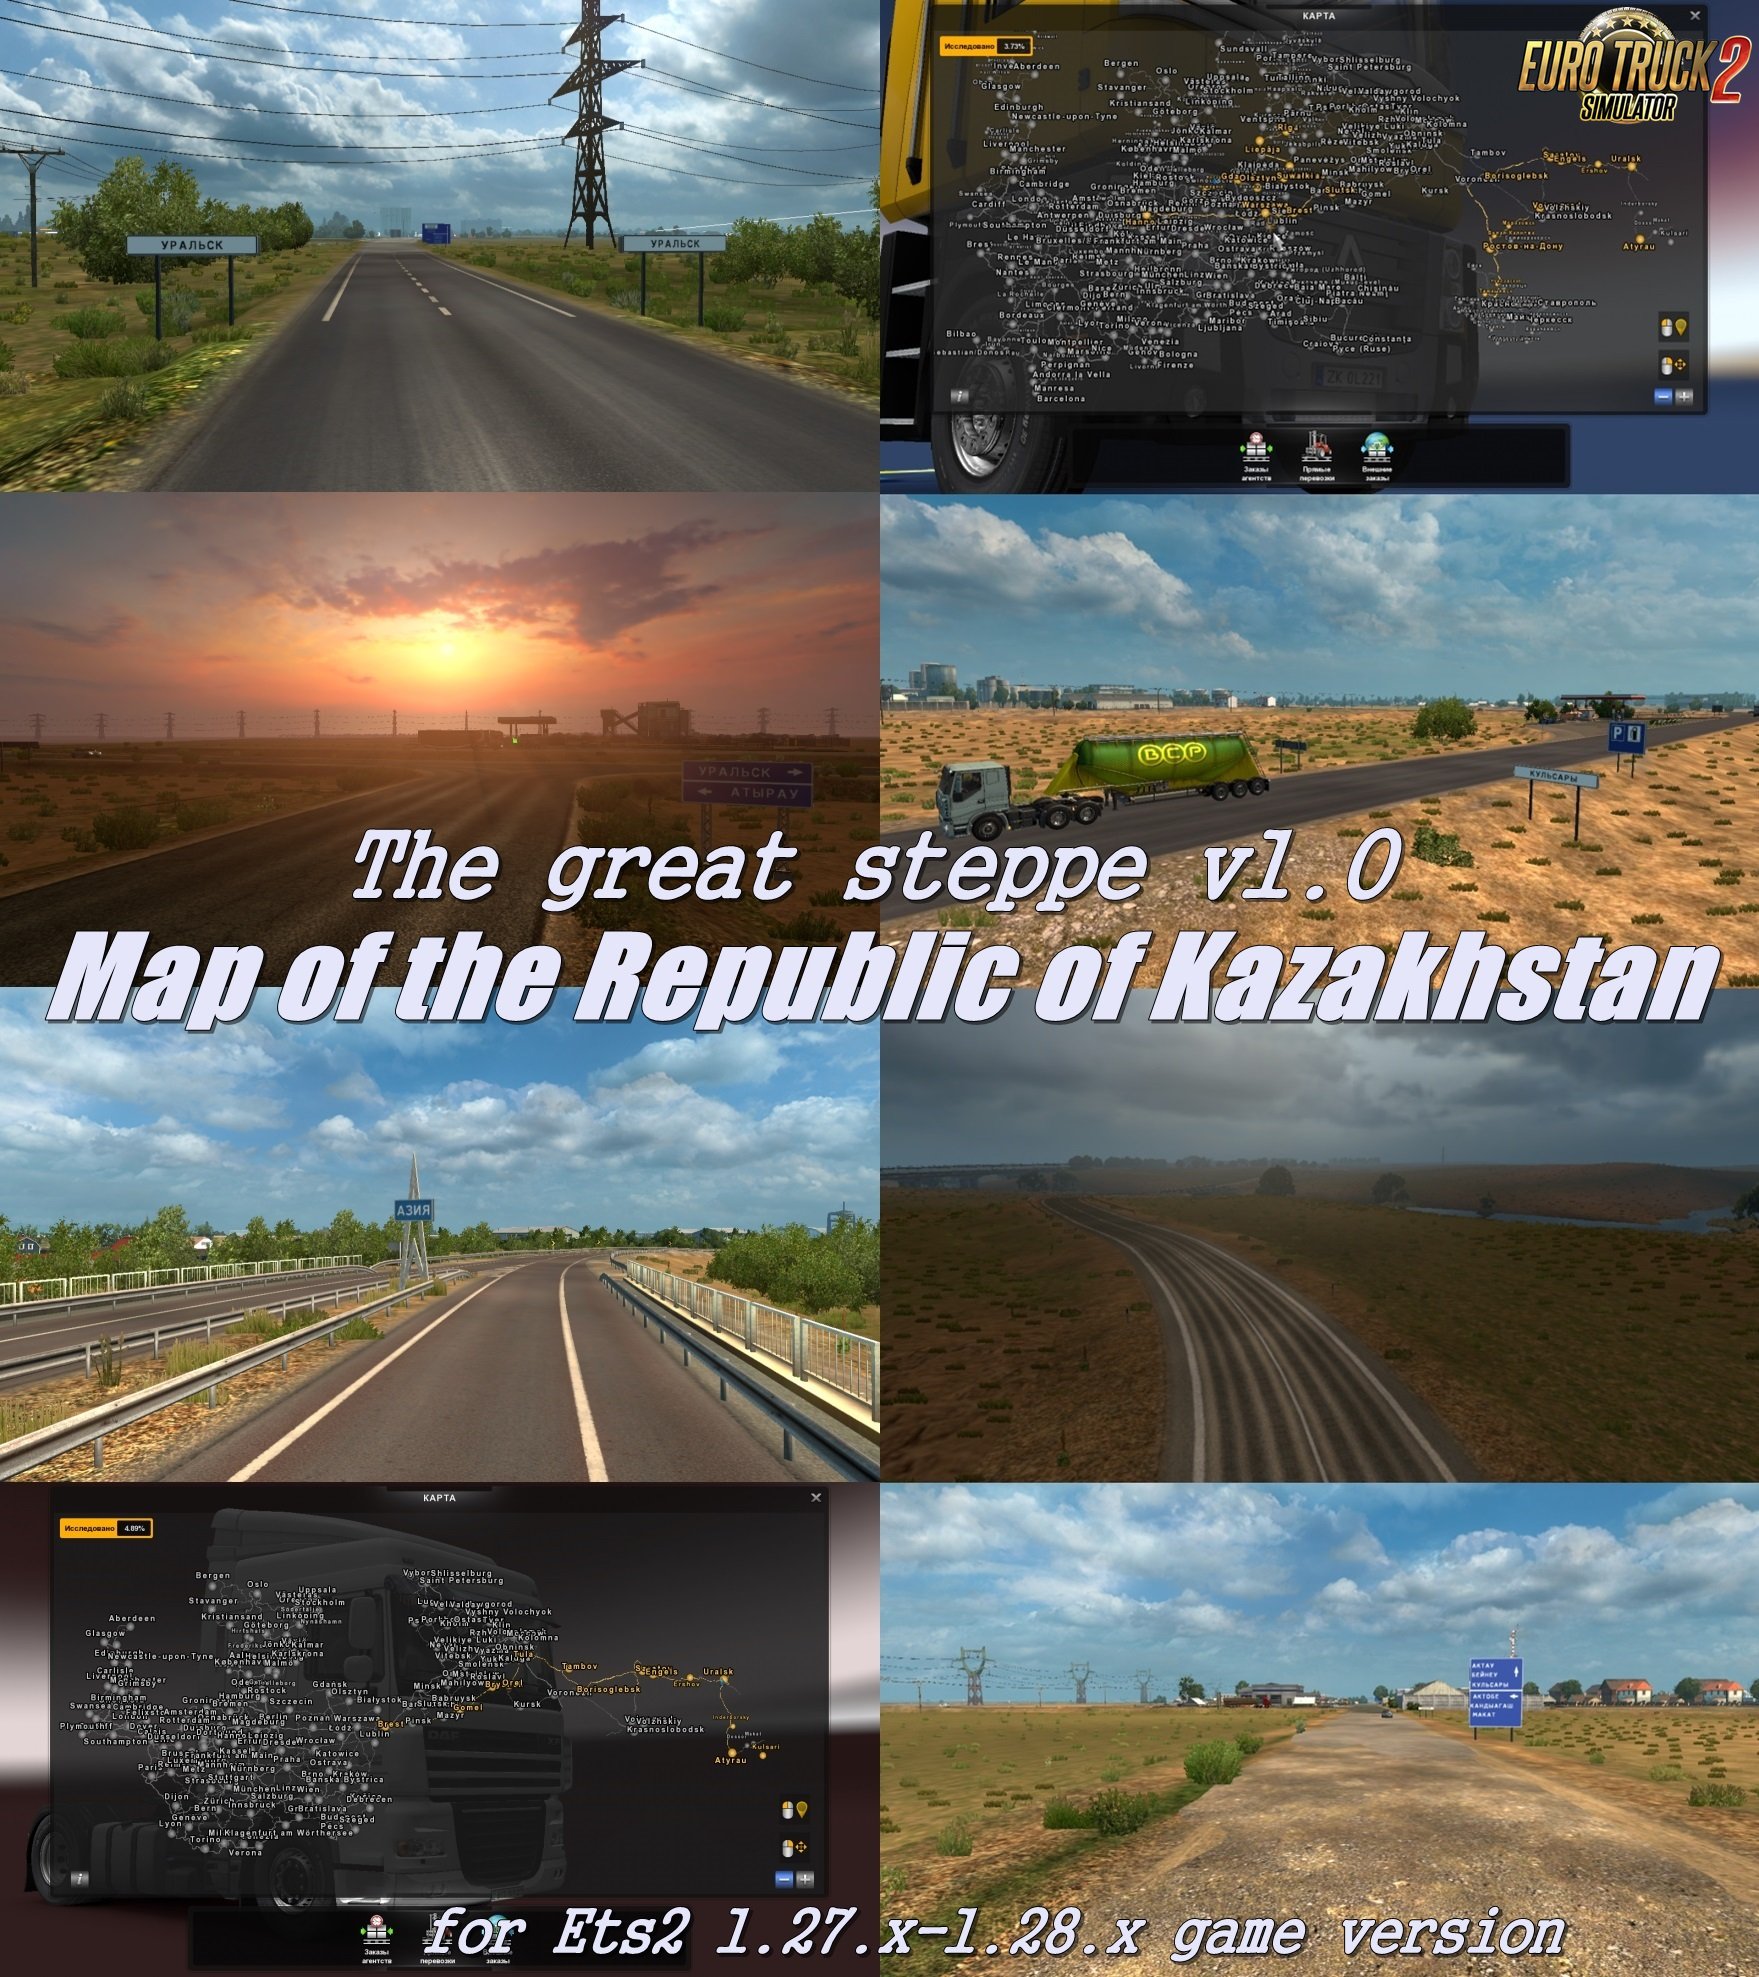 The great steppe v1.0